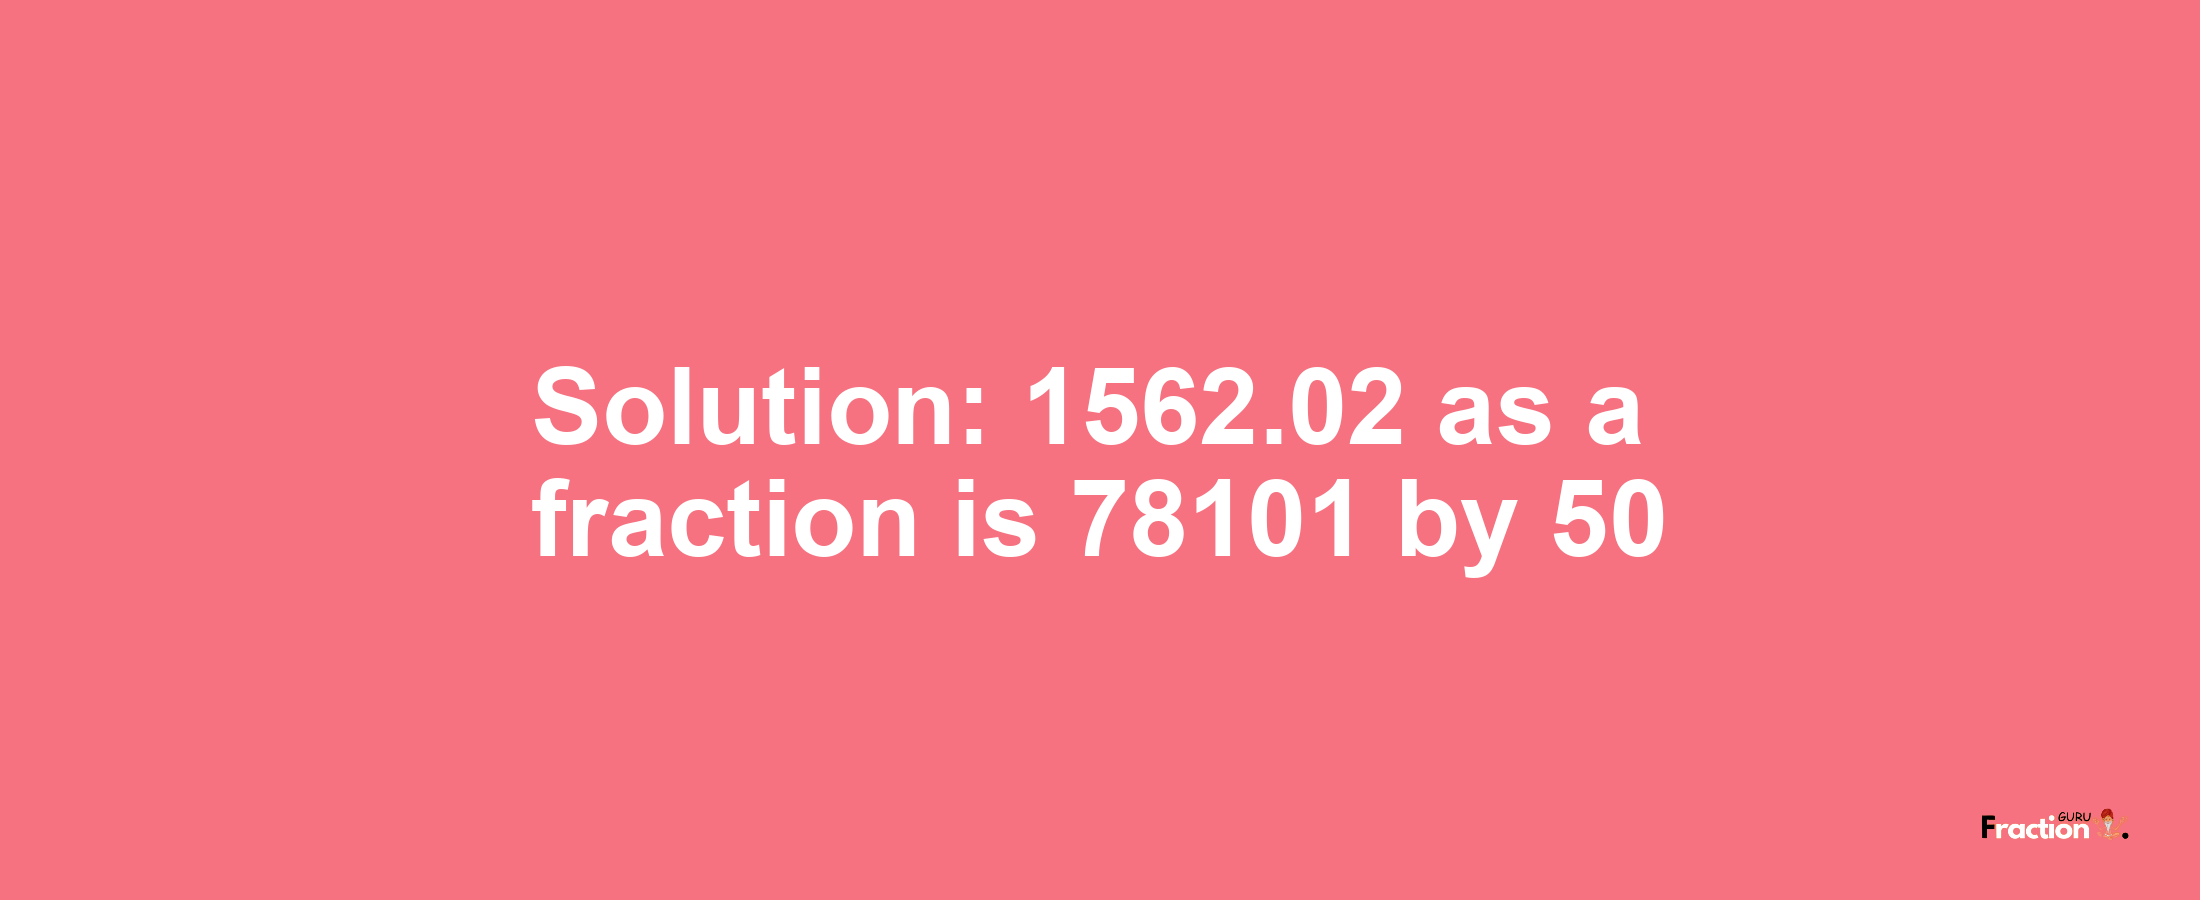 Solution:1562.02 as a fraction is 78101/50